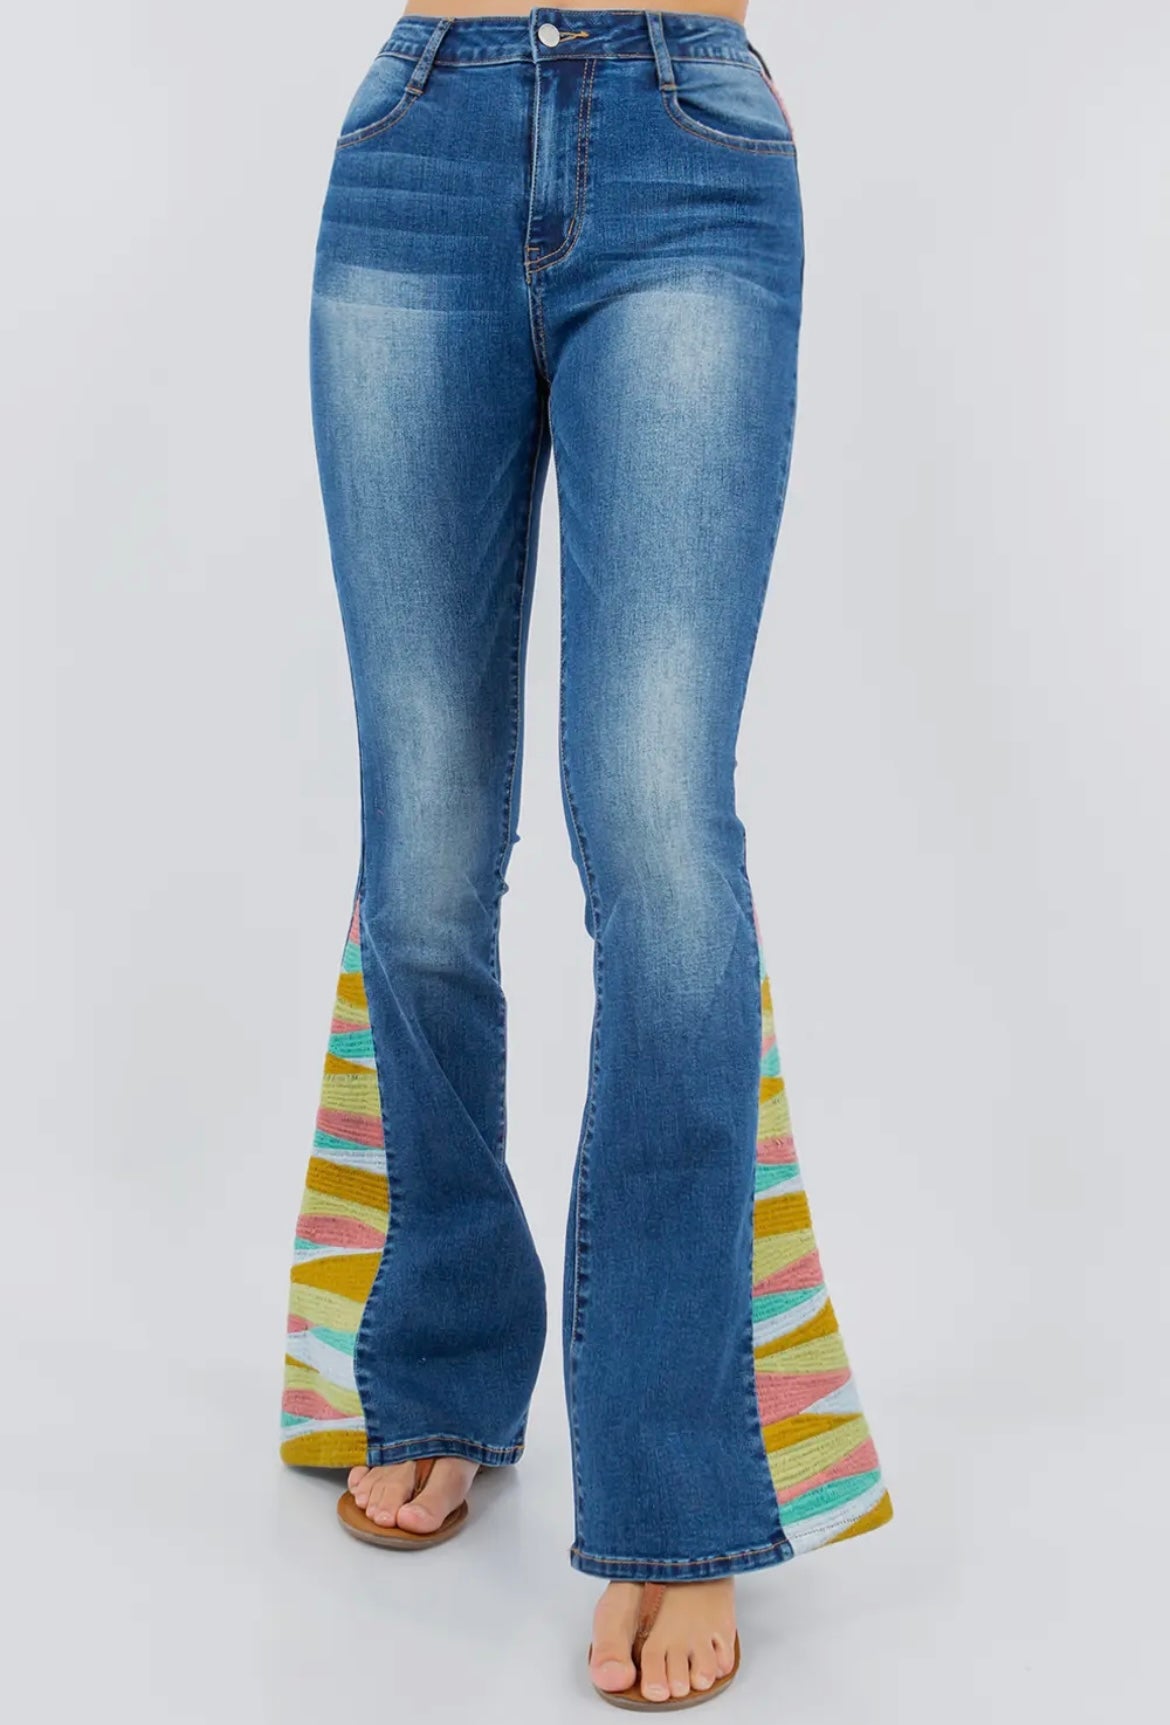 SUNRISE Embroidered Flare Jeans - Pastel